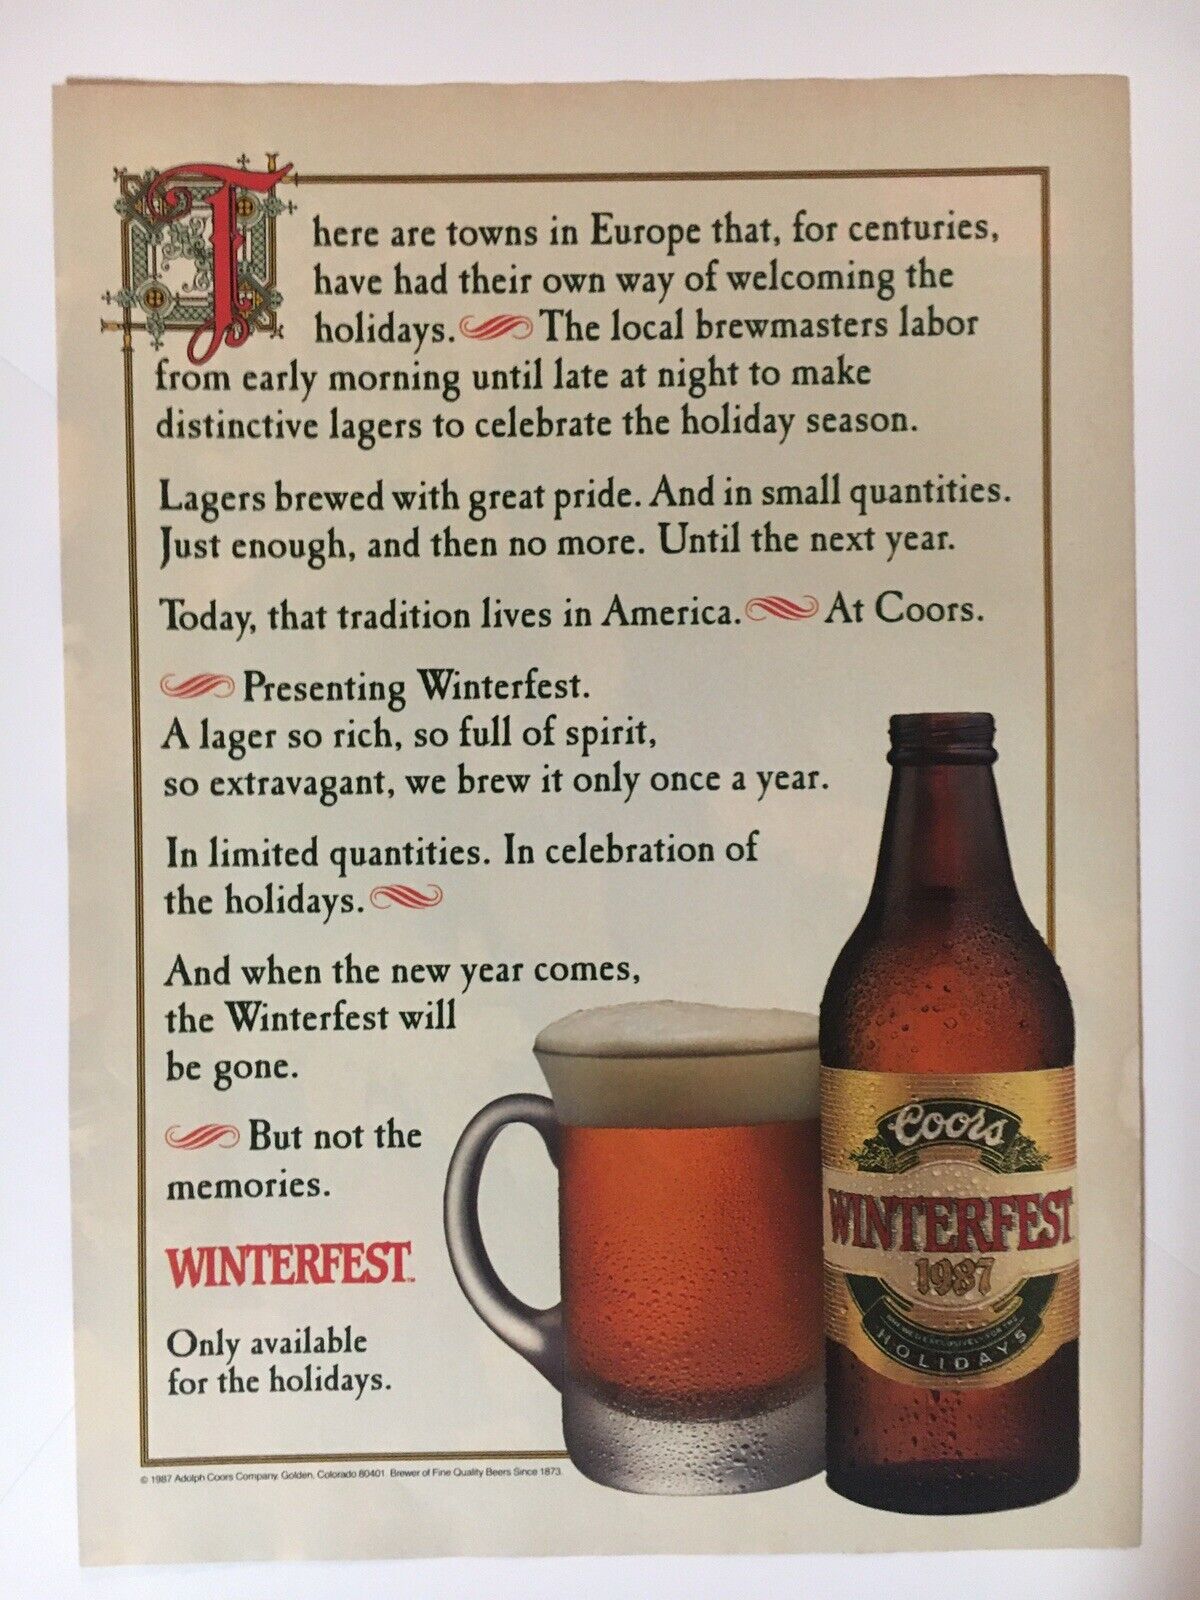 Coors Beer Winterfest 1987 Vintage Print Ad 8x11 Inches Bar Decor